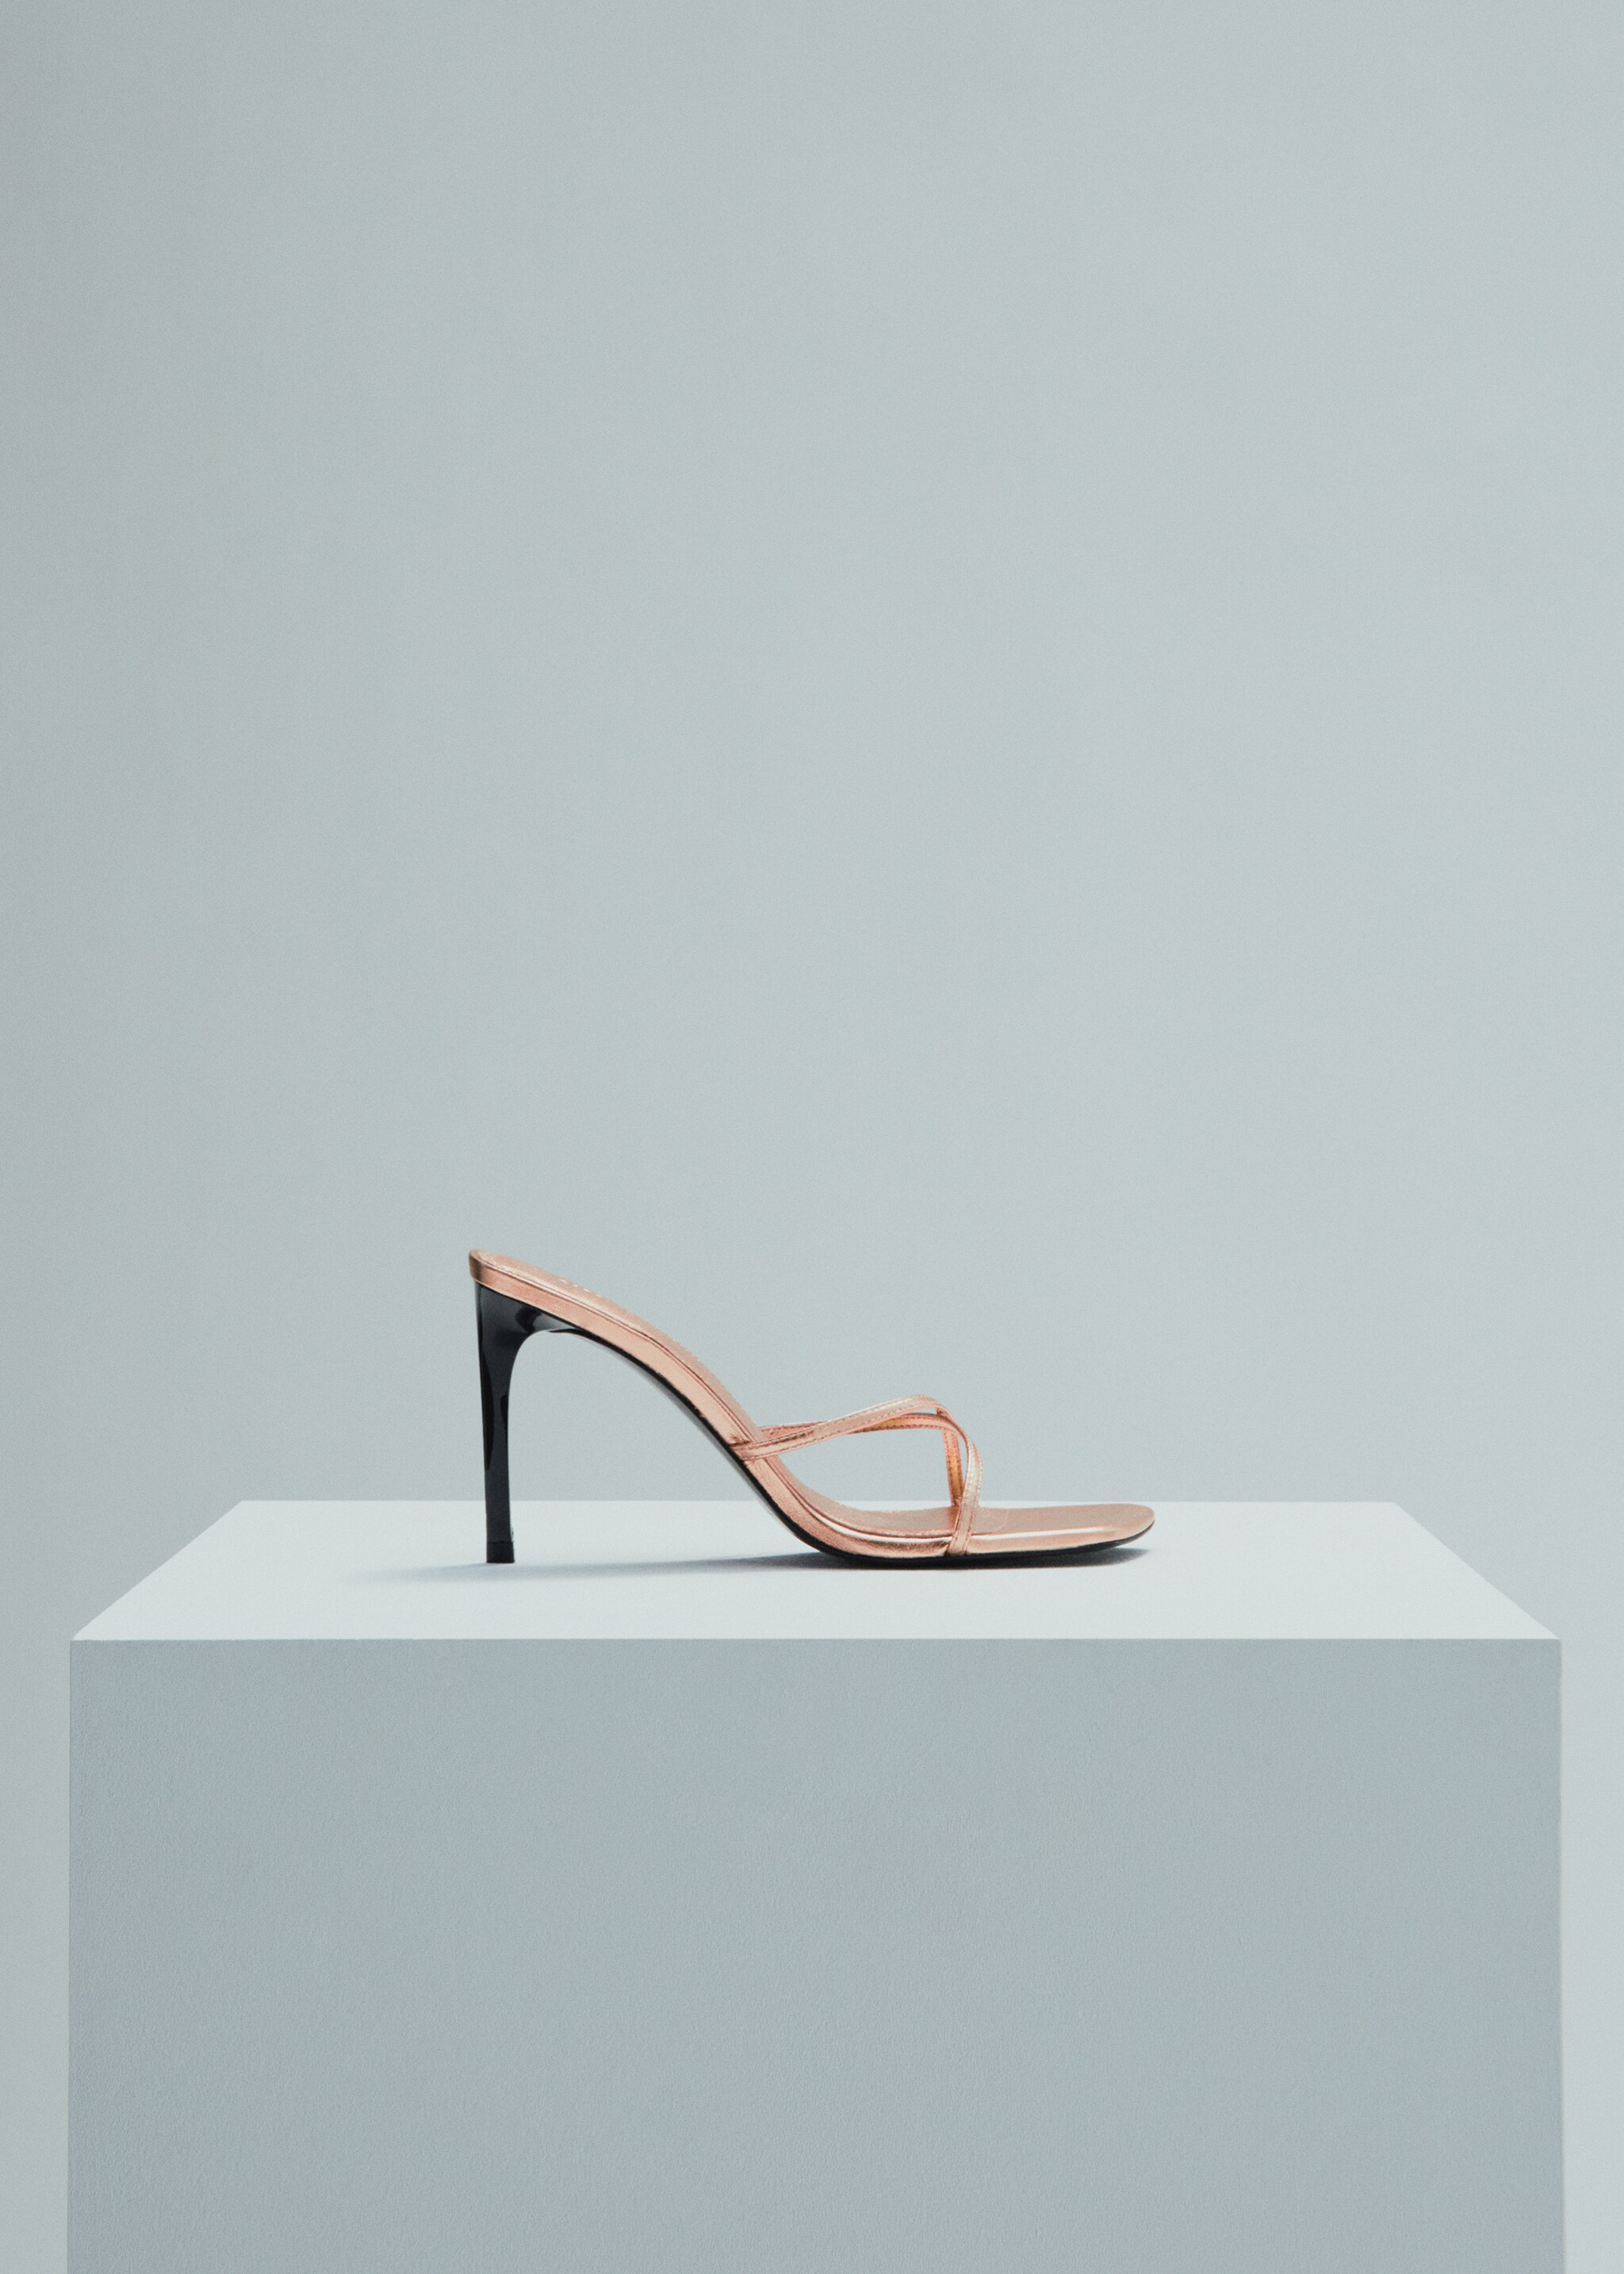 Heeled leather sandals with straps - Article without model